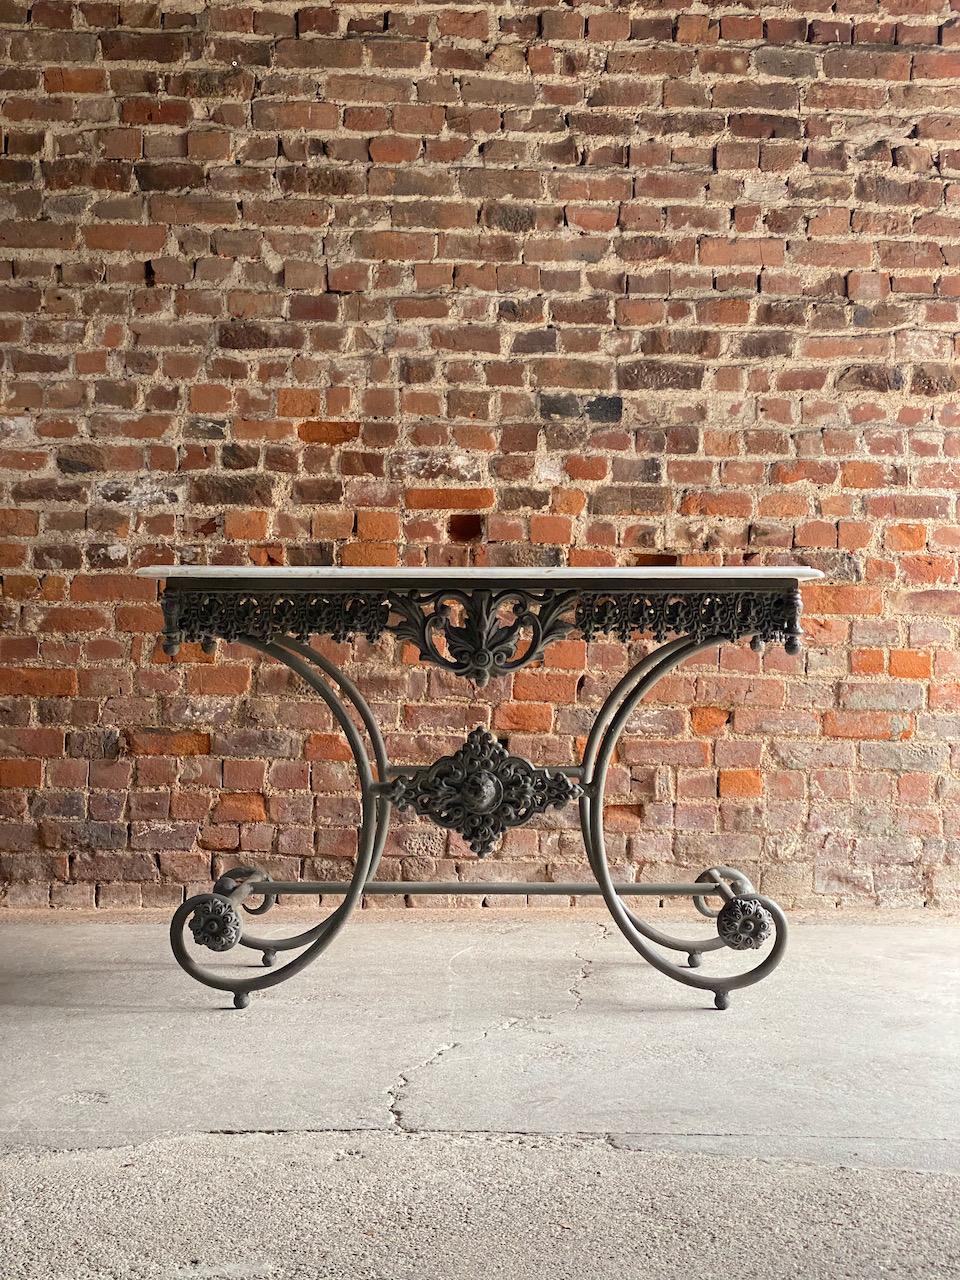 antique french pastry table